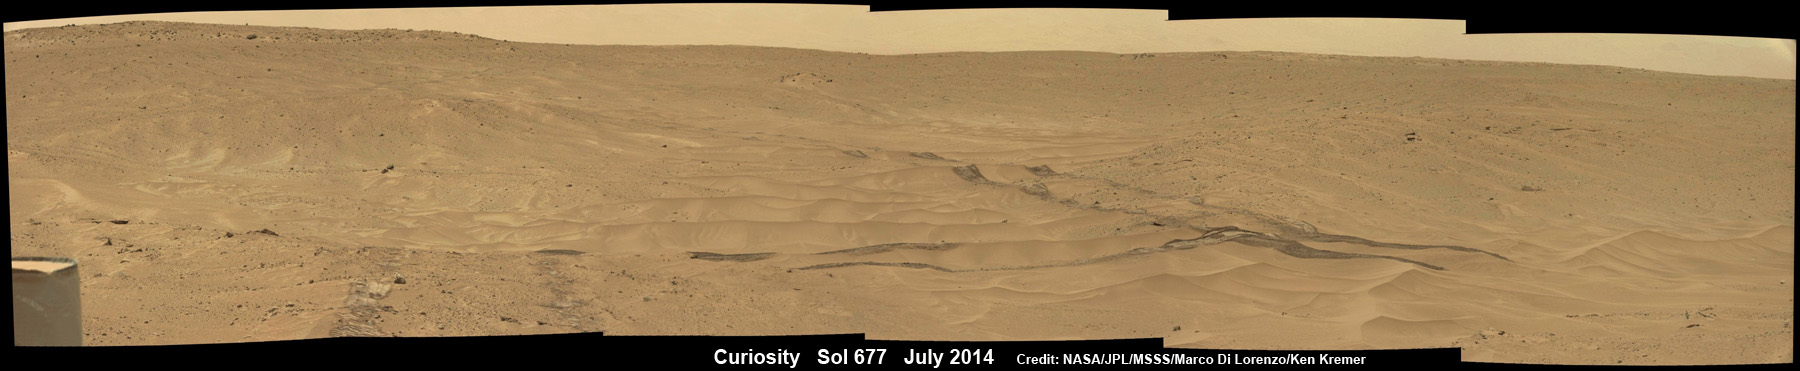 Curiosity cross windblown ripples on Mars on the traverse to Mount Sharp in this photo mosaic view captured on July 1, 2014, Sol 677. Mastcam raw images from Sol 677 stitched. Credit: NASA/JPL-Caltech/MSSS/Marco Di Lorenzo/Ken Kremer – kenkremer.com